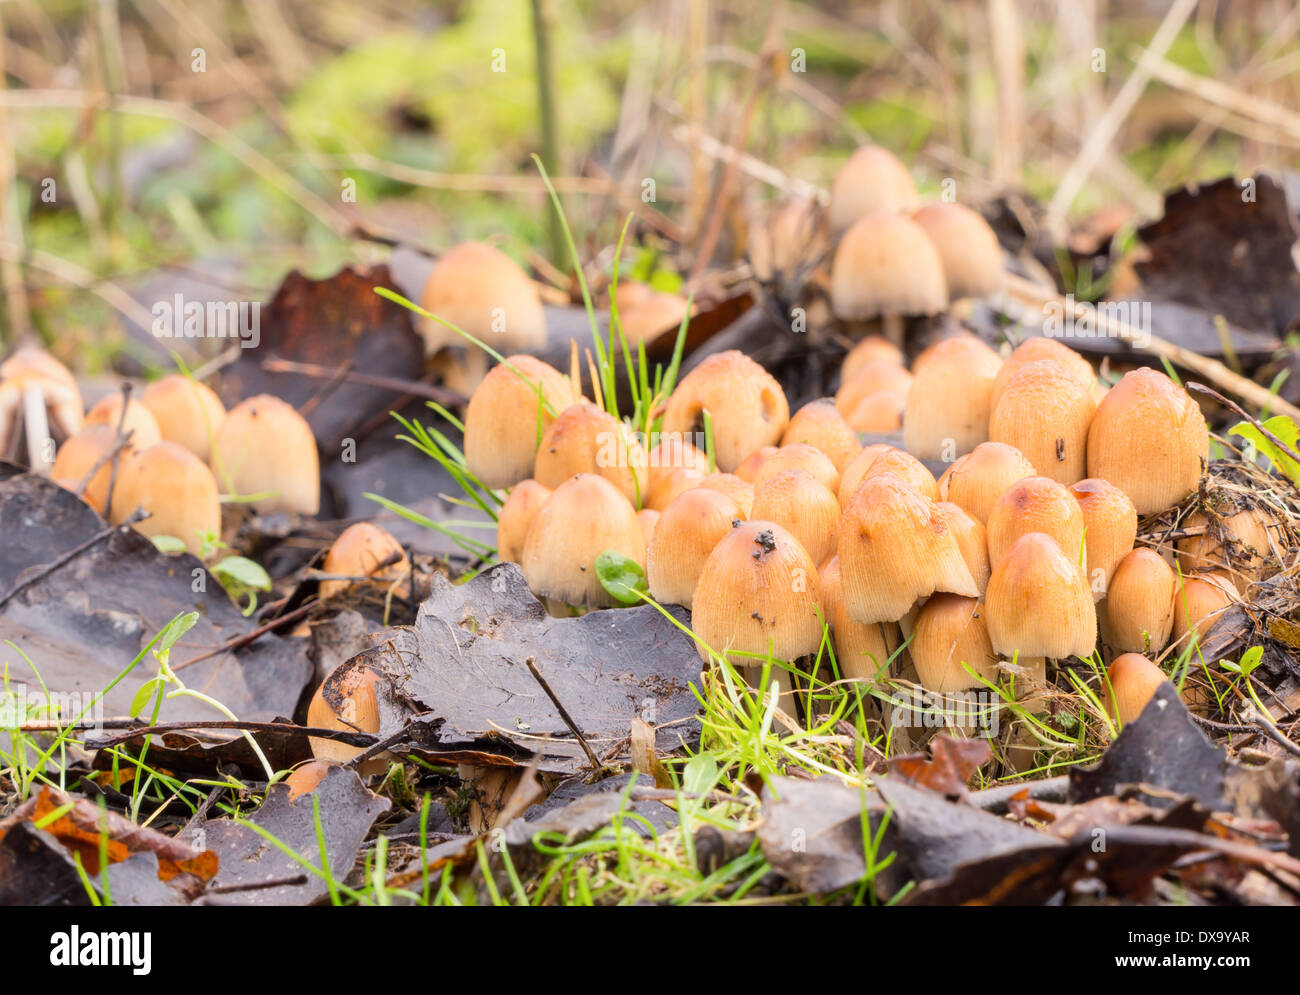 Close-up of a group of Coprinellus micaceus mushroom Stock Photo